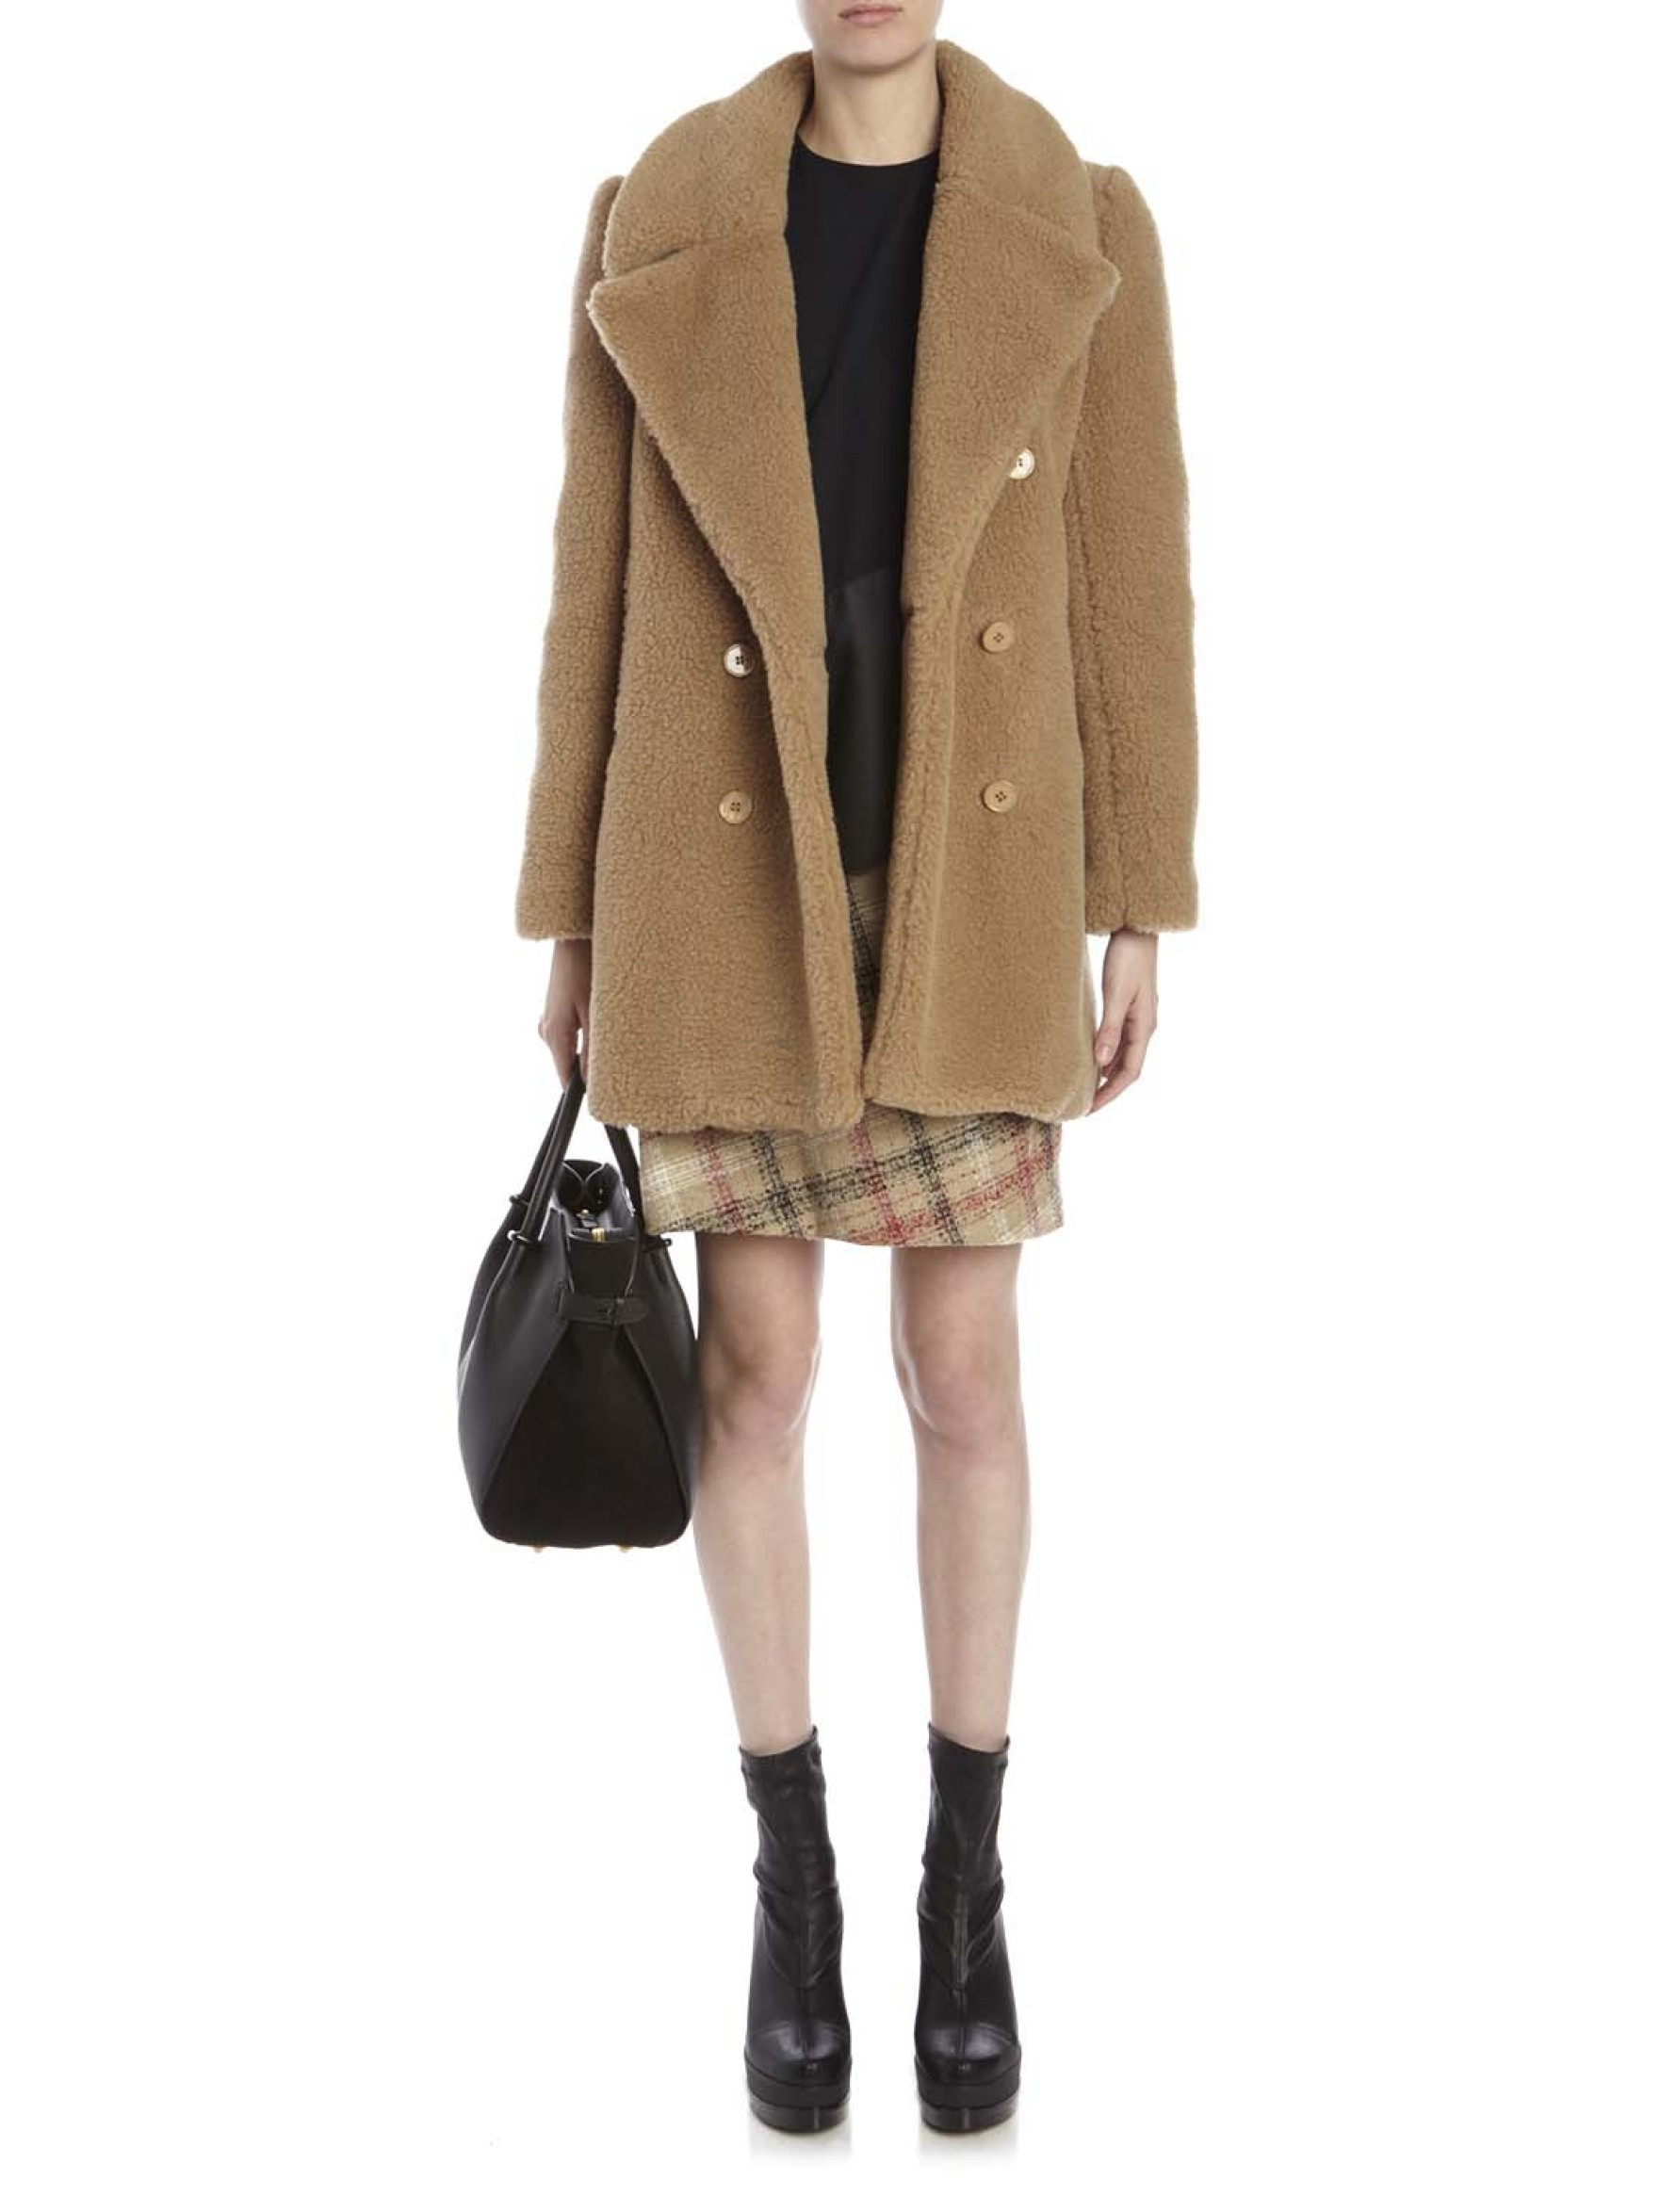 Carven Faux Shearling Coat in Natural | Lyst